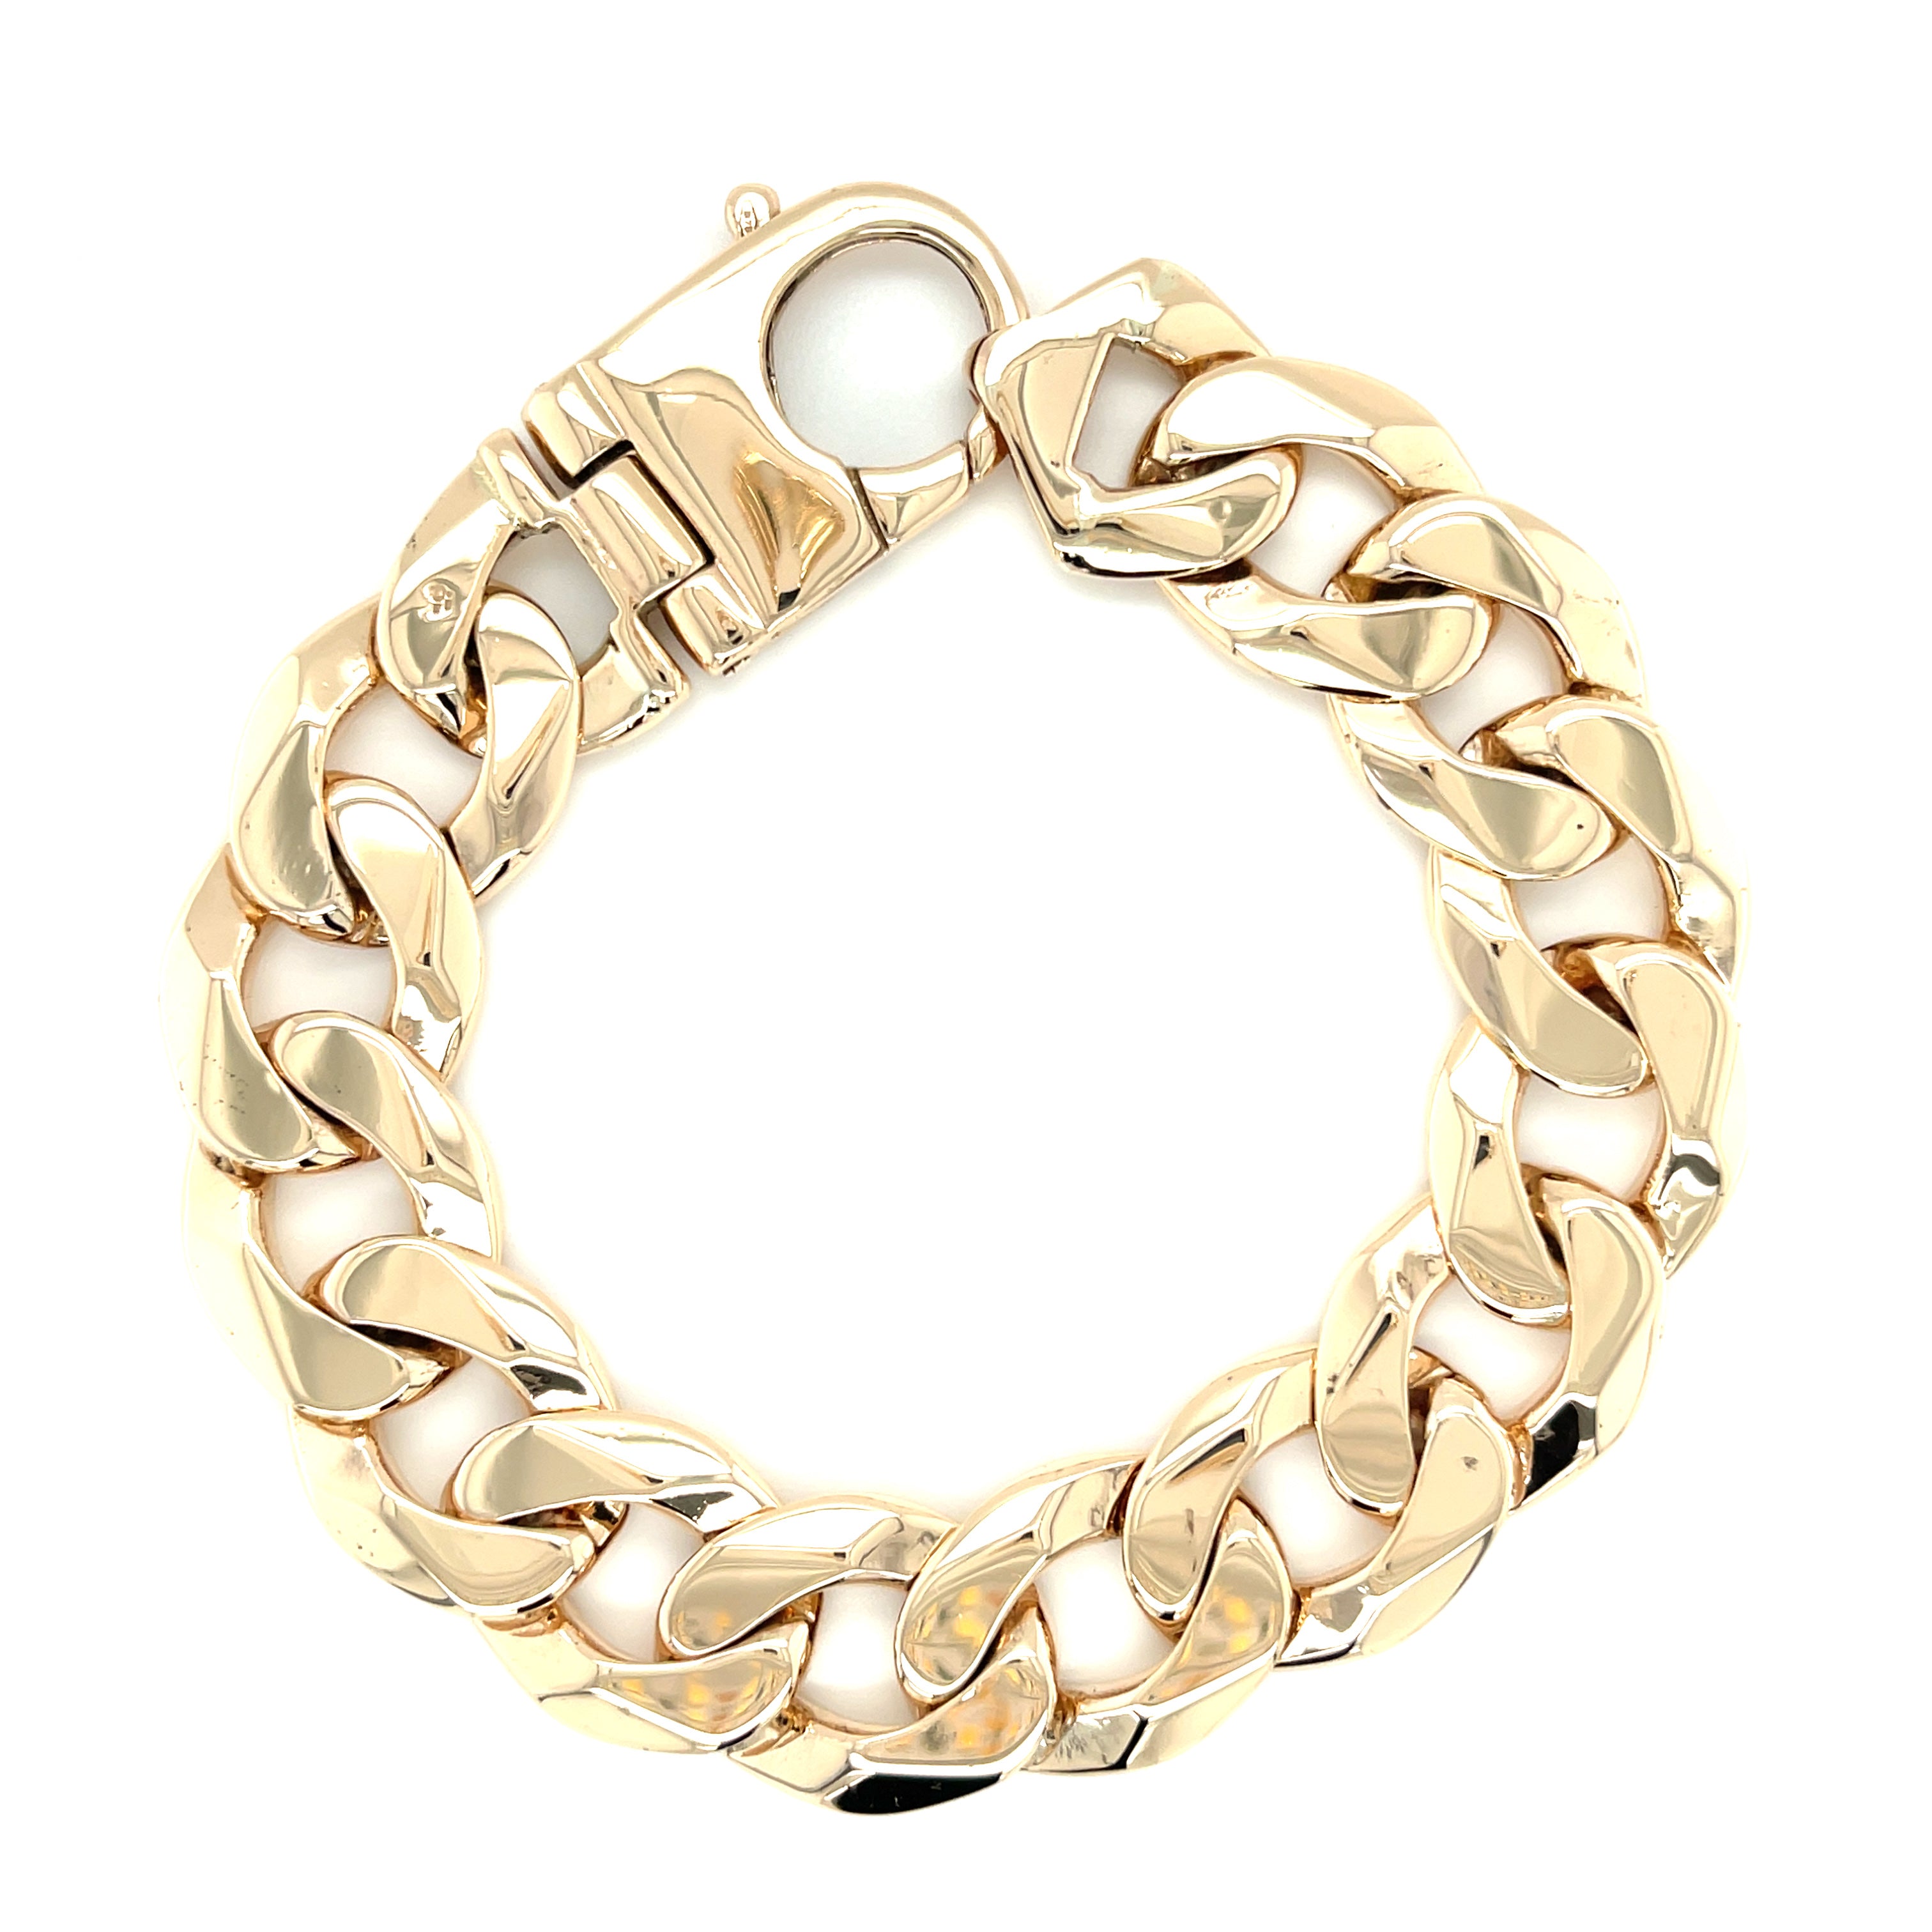 9ct Yellow Gold Heavy 9 Inch Curb Link Bracelet - 88.50g SOLD